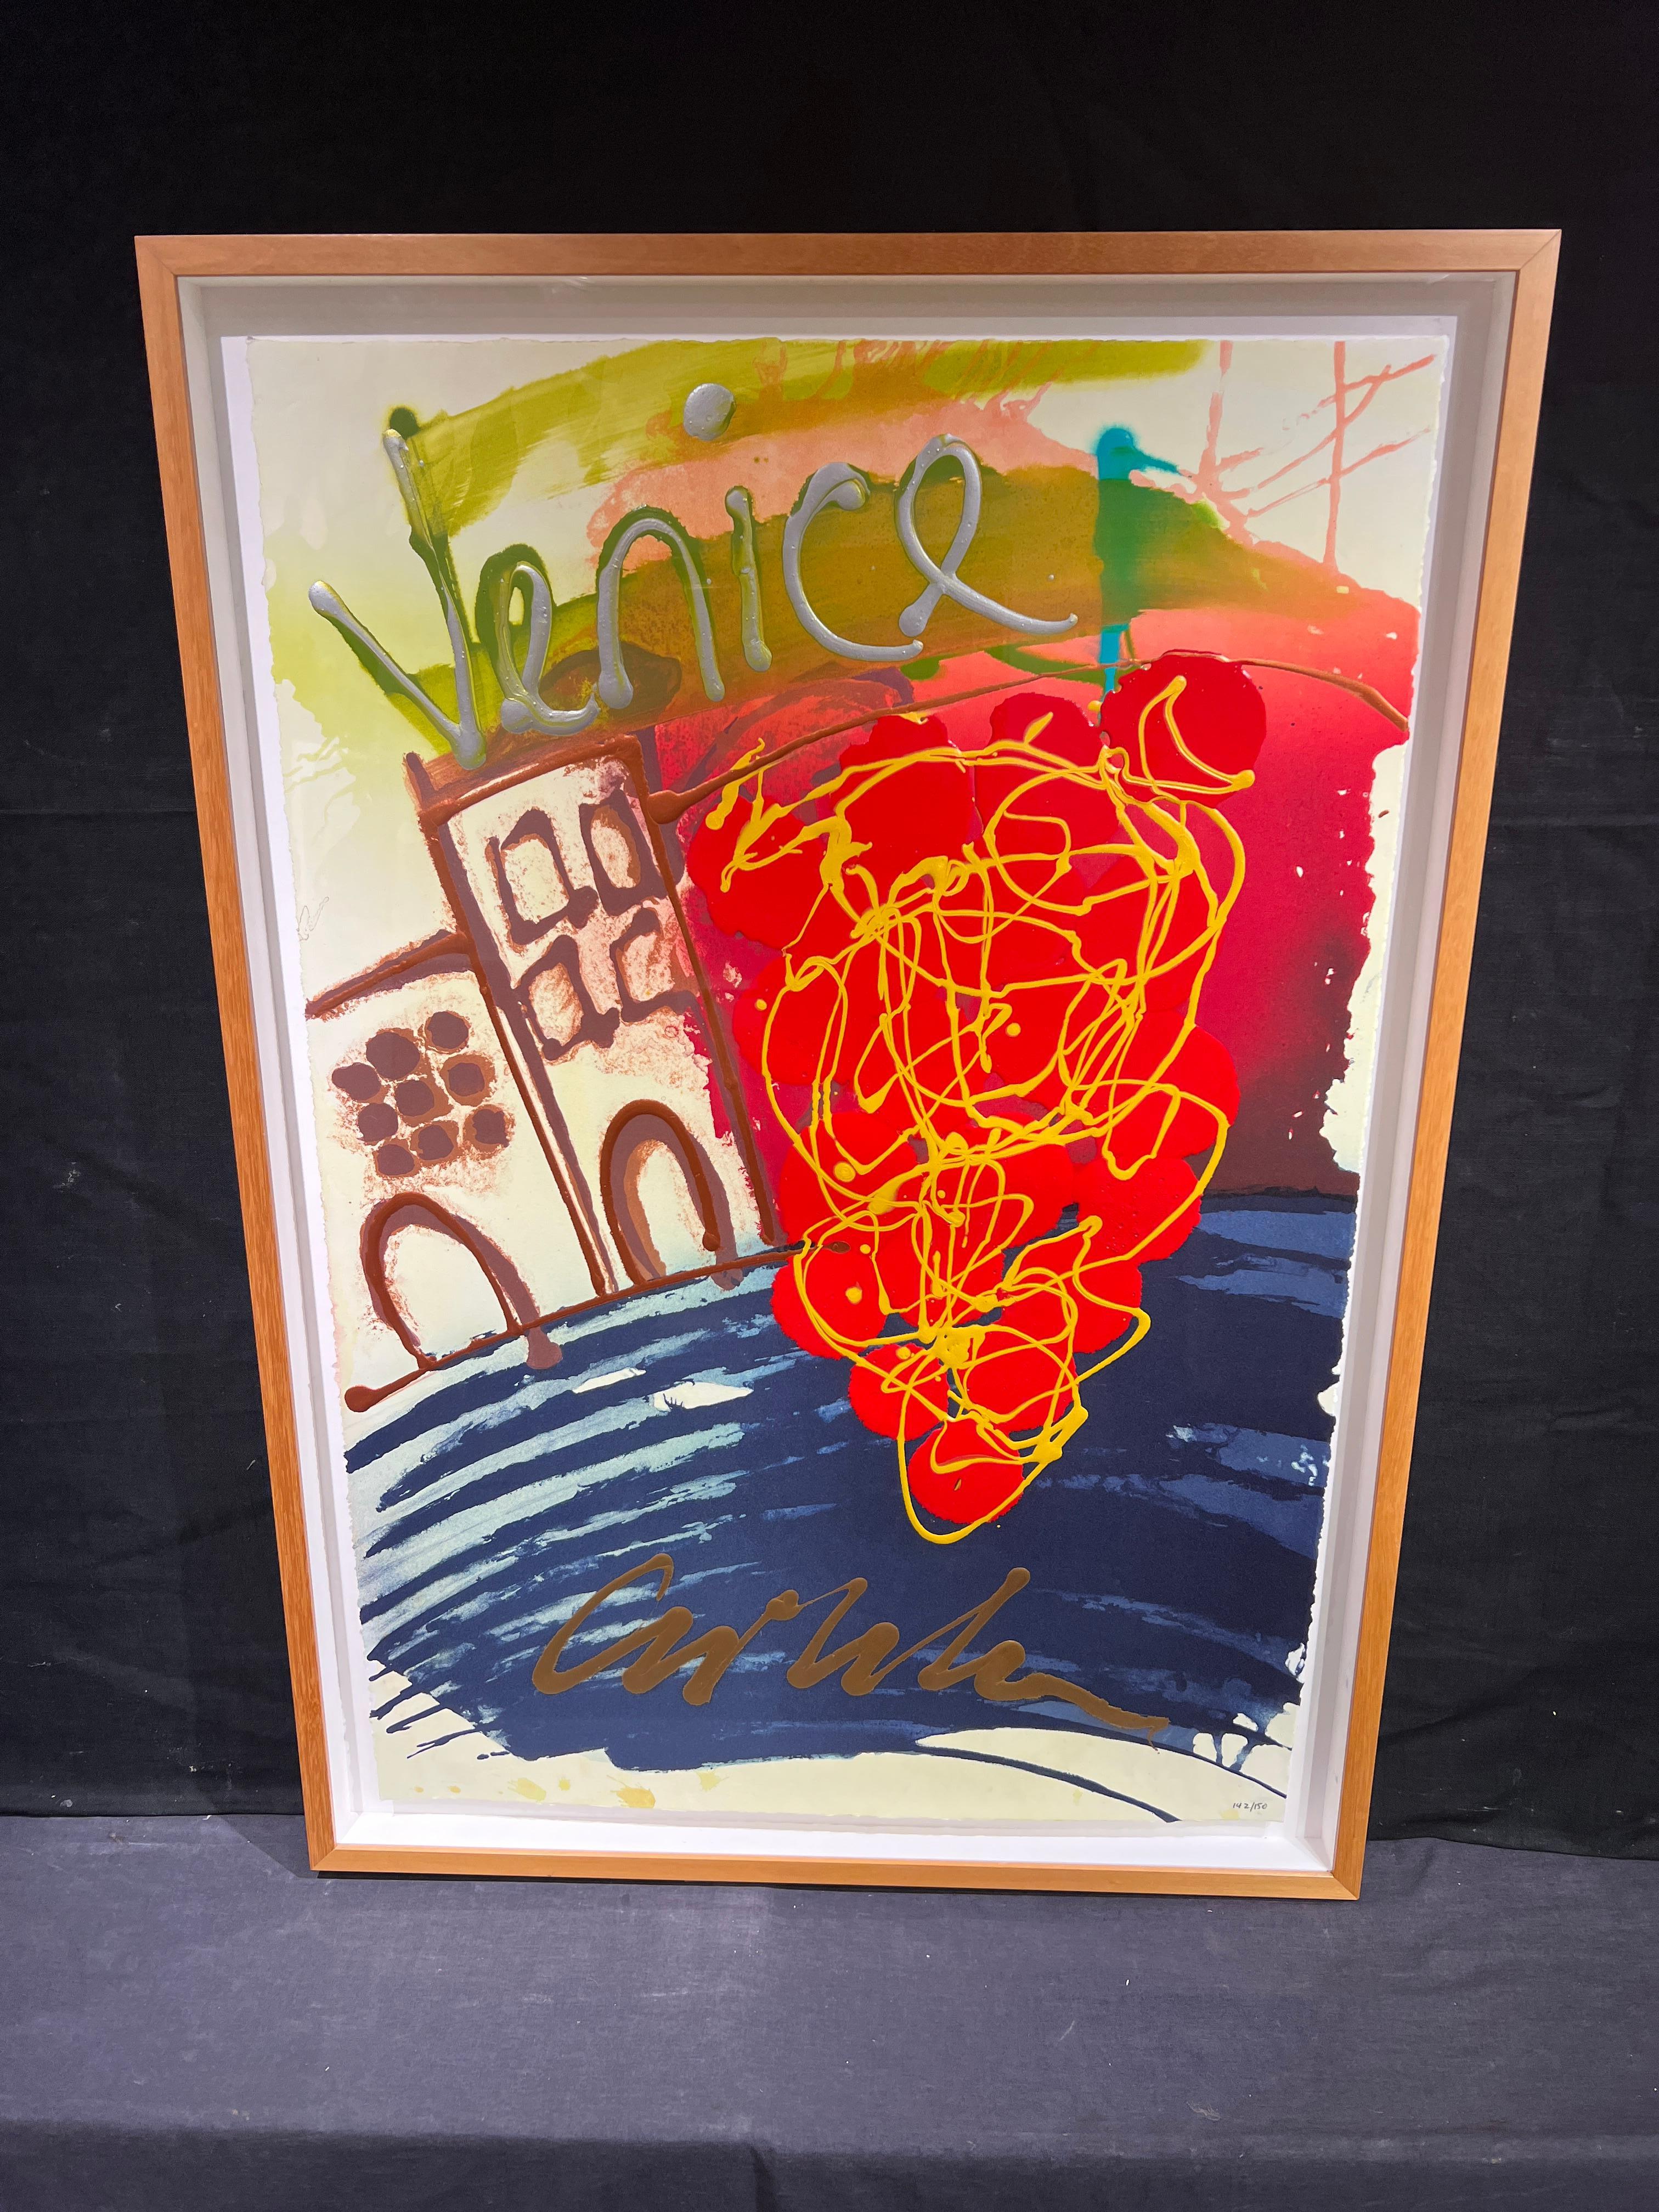 Float Drawing, Venice
By. Dale Chihuly (American, b. 1941)
With frame: 40.75 x 28.75 inches
Without frame: 36.5 x 24.75 inches
Edition: 142/150 bottom right
Signed in Paint bottom center

Born in 1941 in Tacoma, Washington, Dale Chihuly was